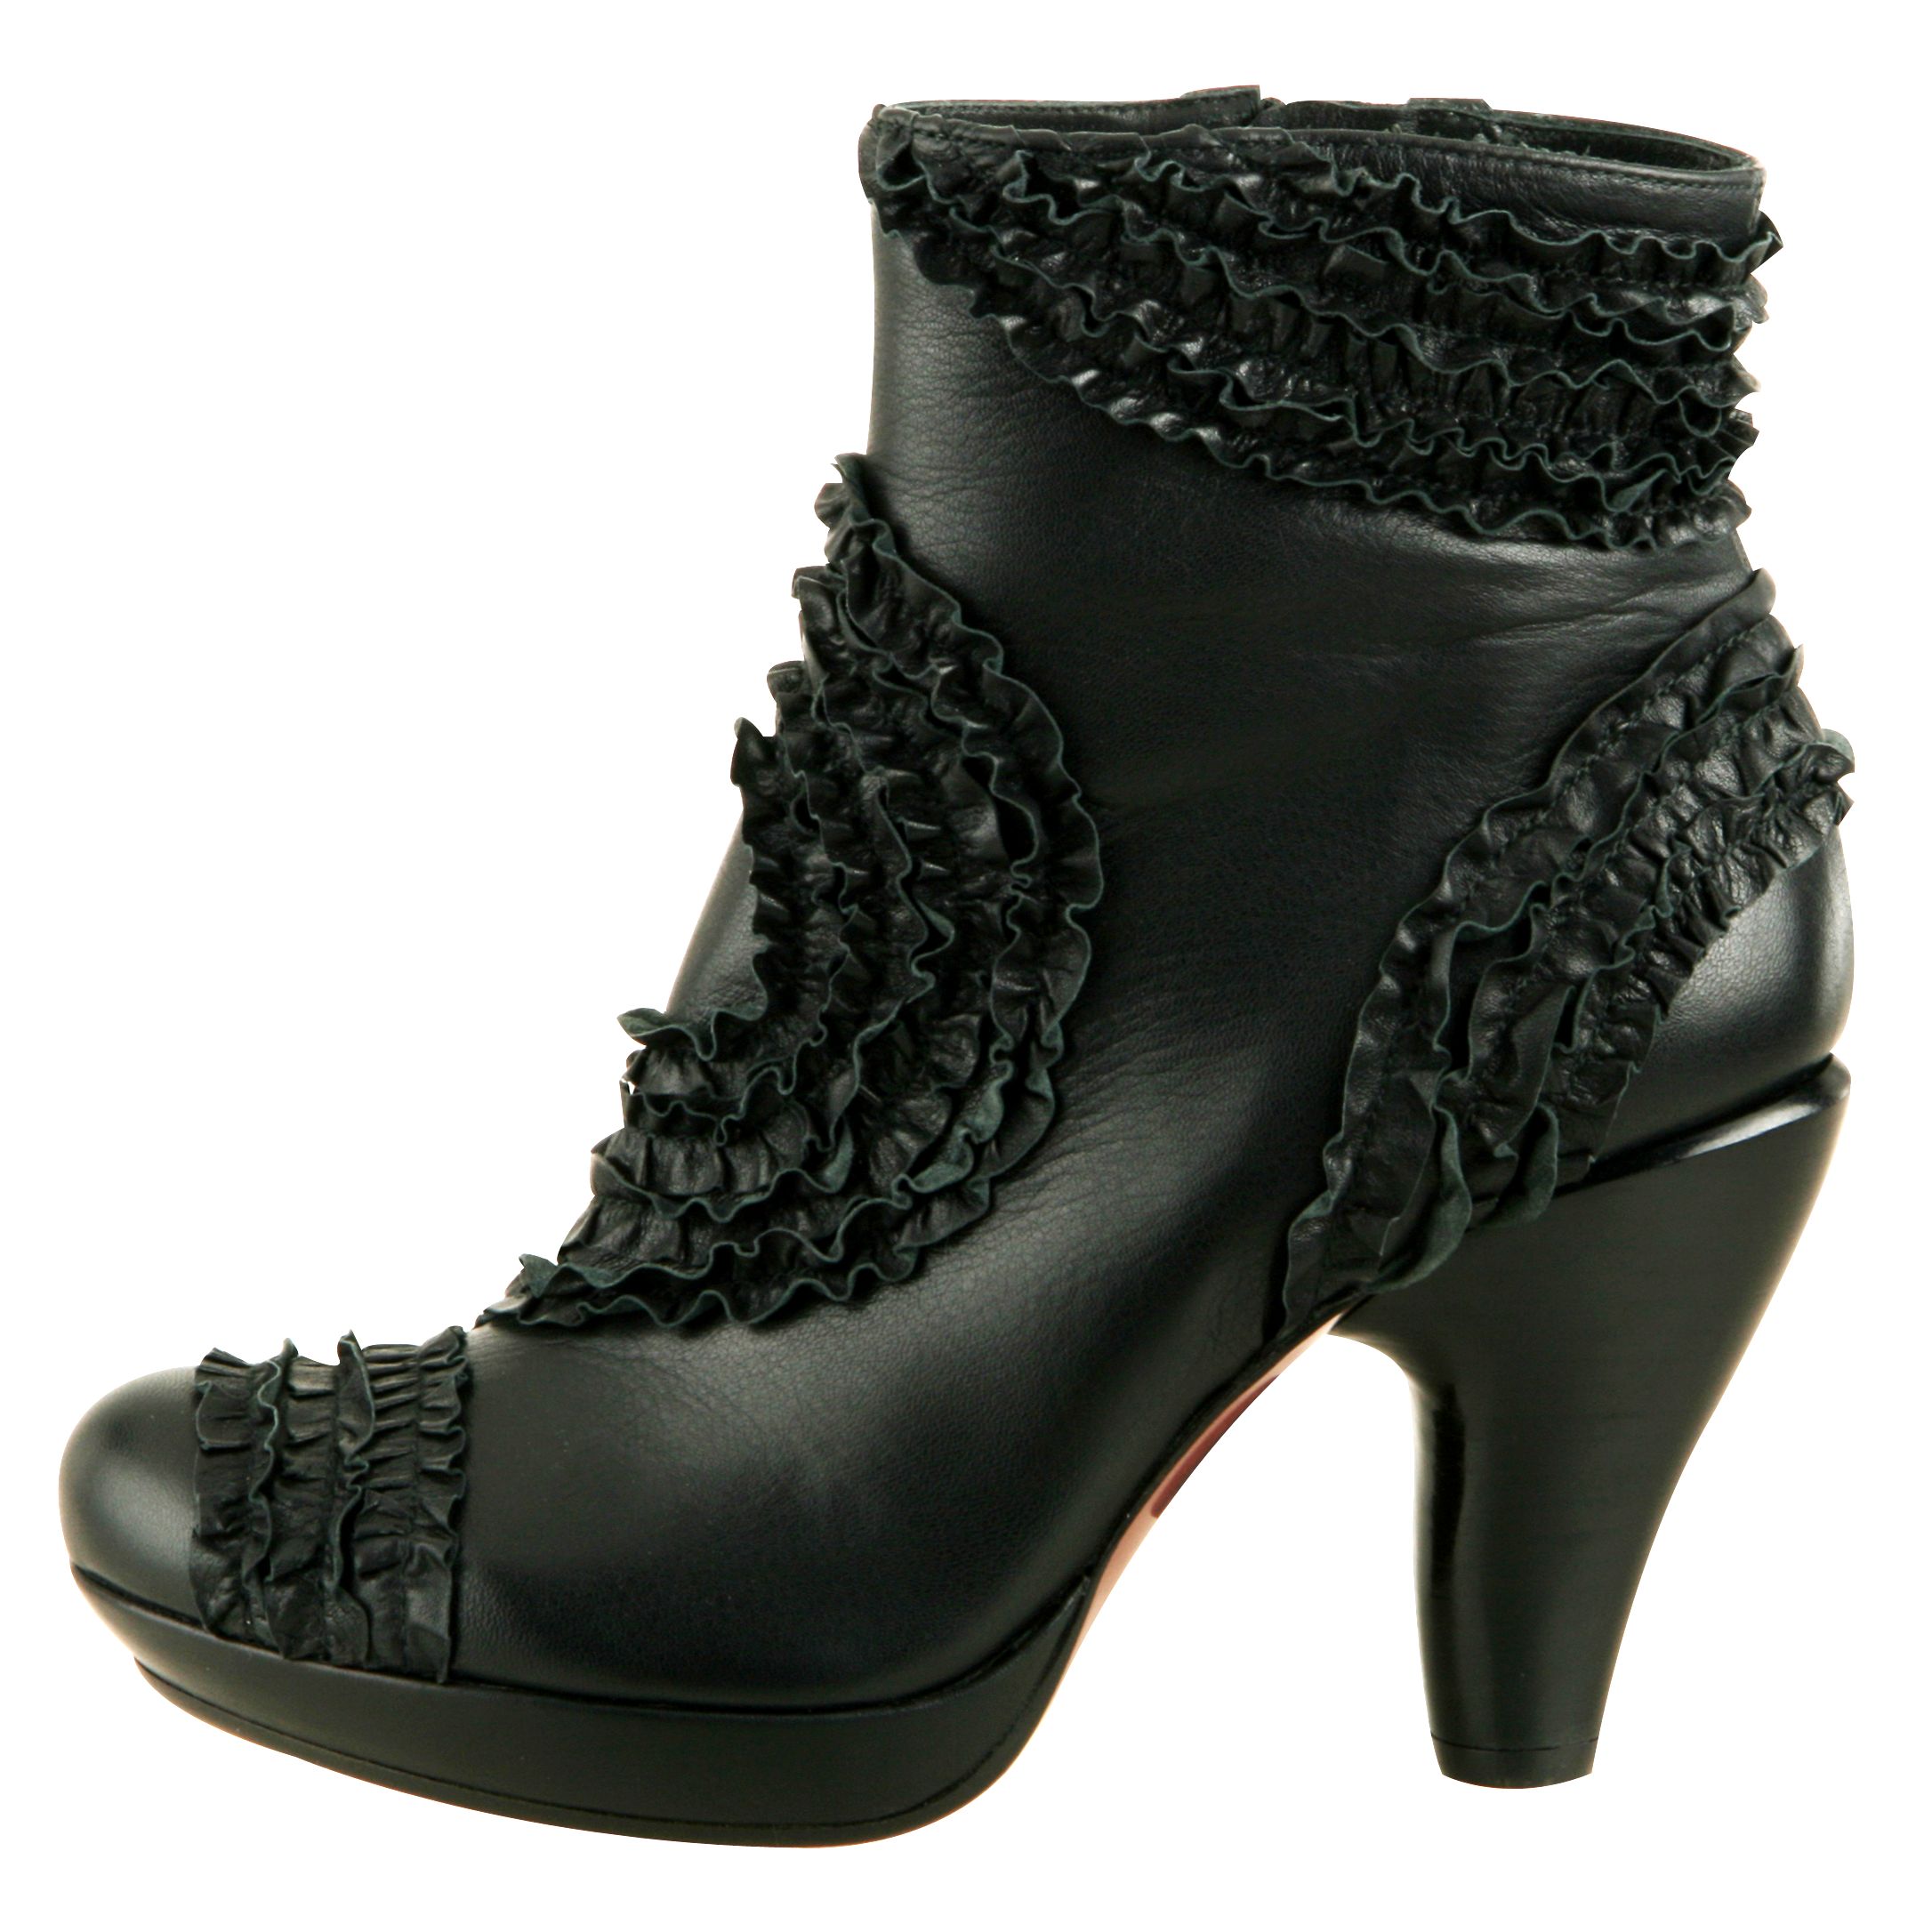 Chie Mihara Atenea Frilled Ankle Boots, Black at John Lewis